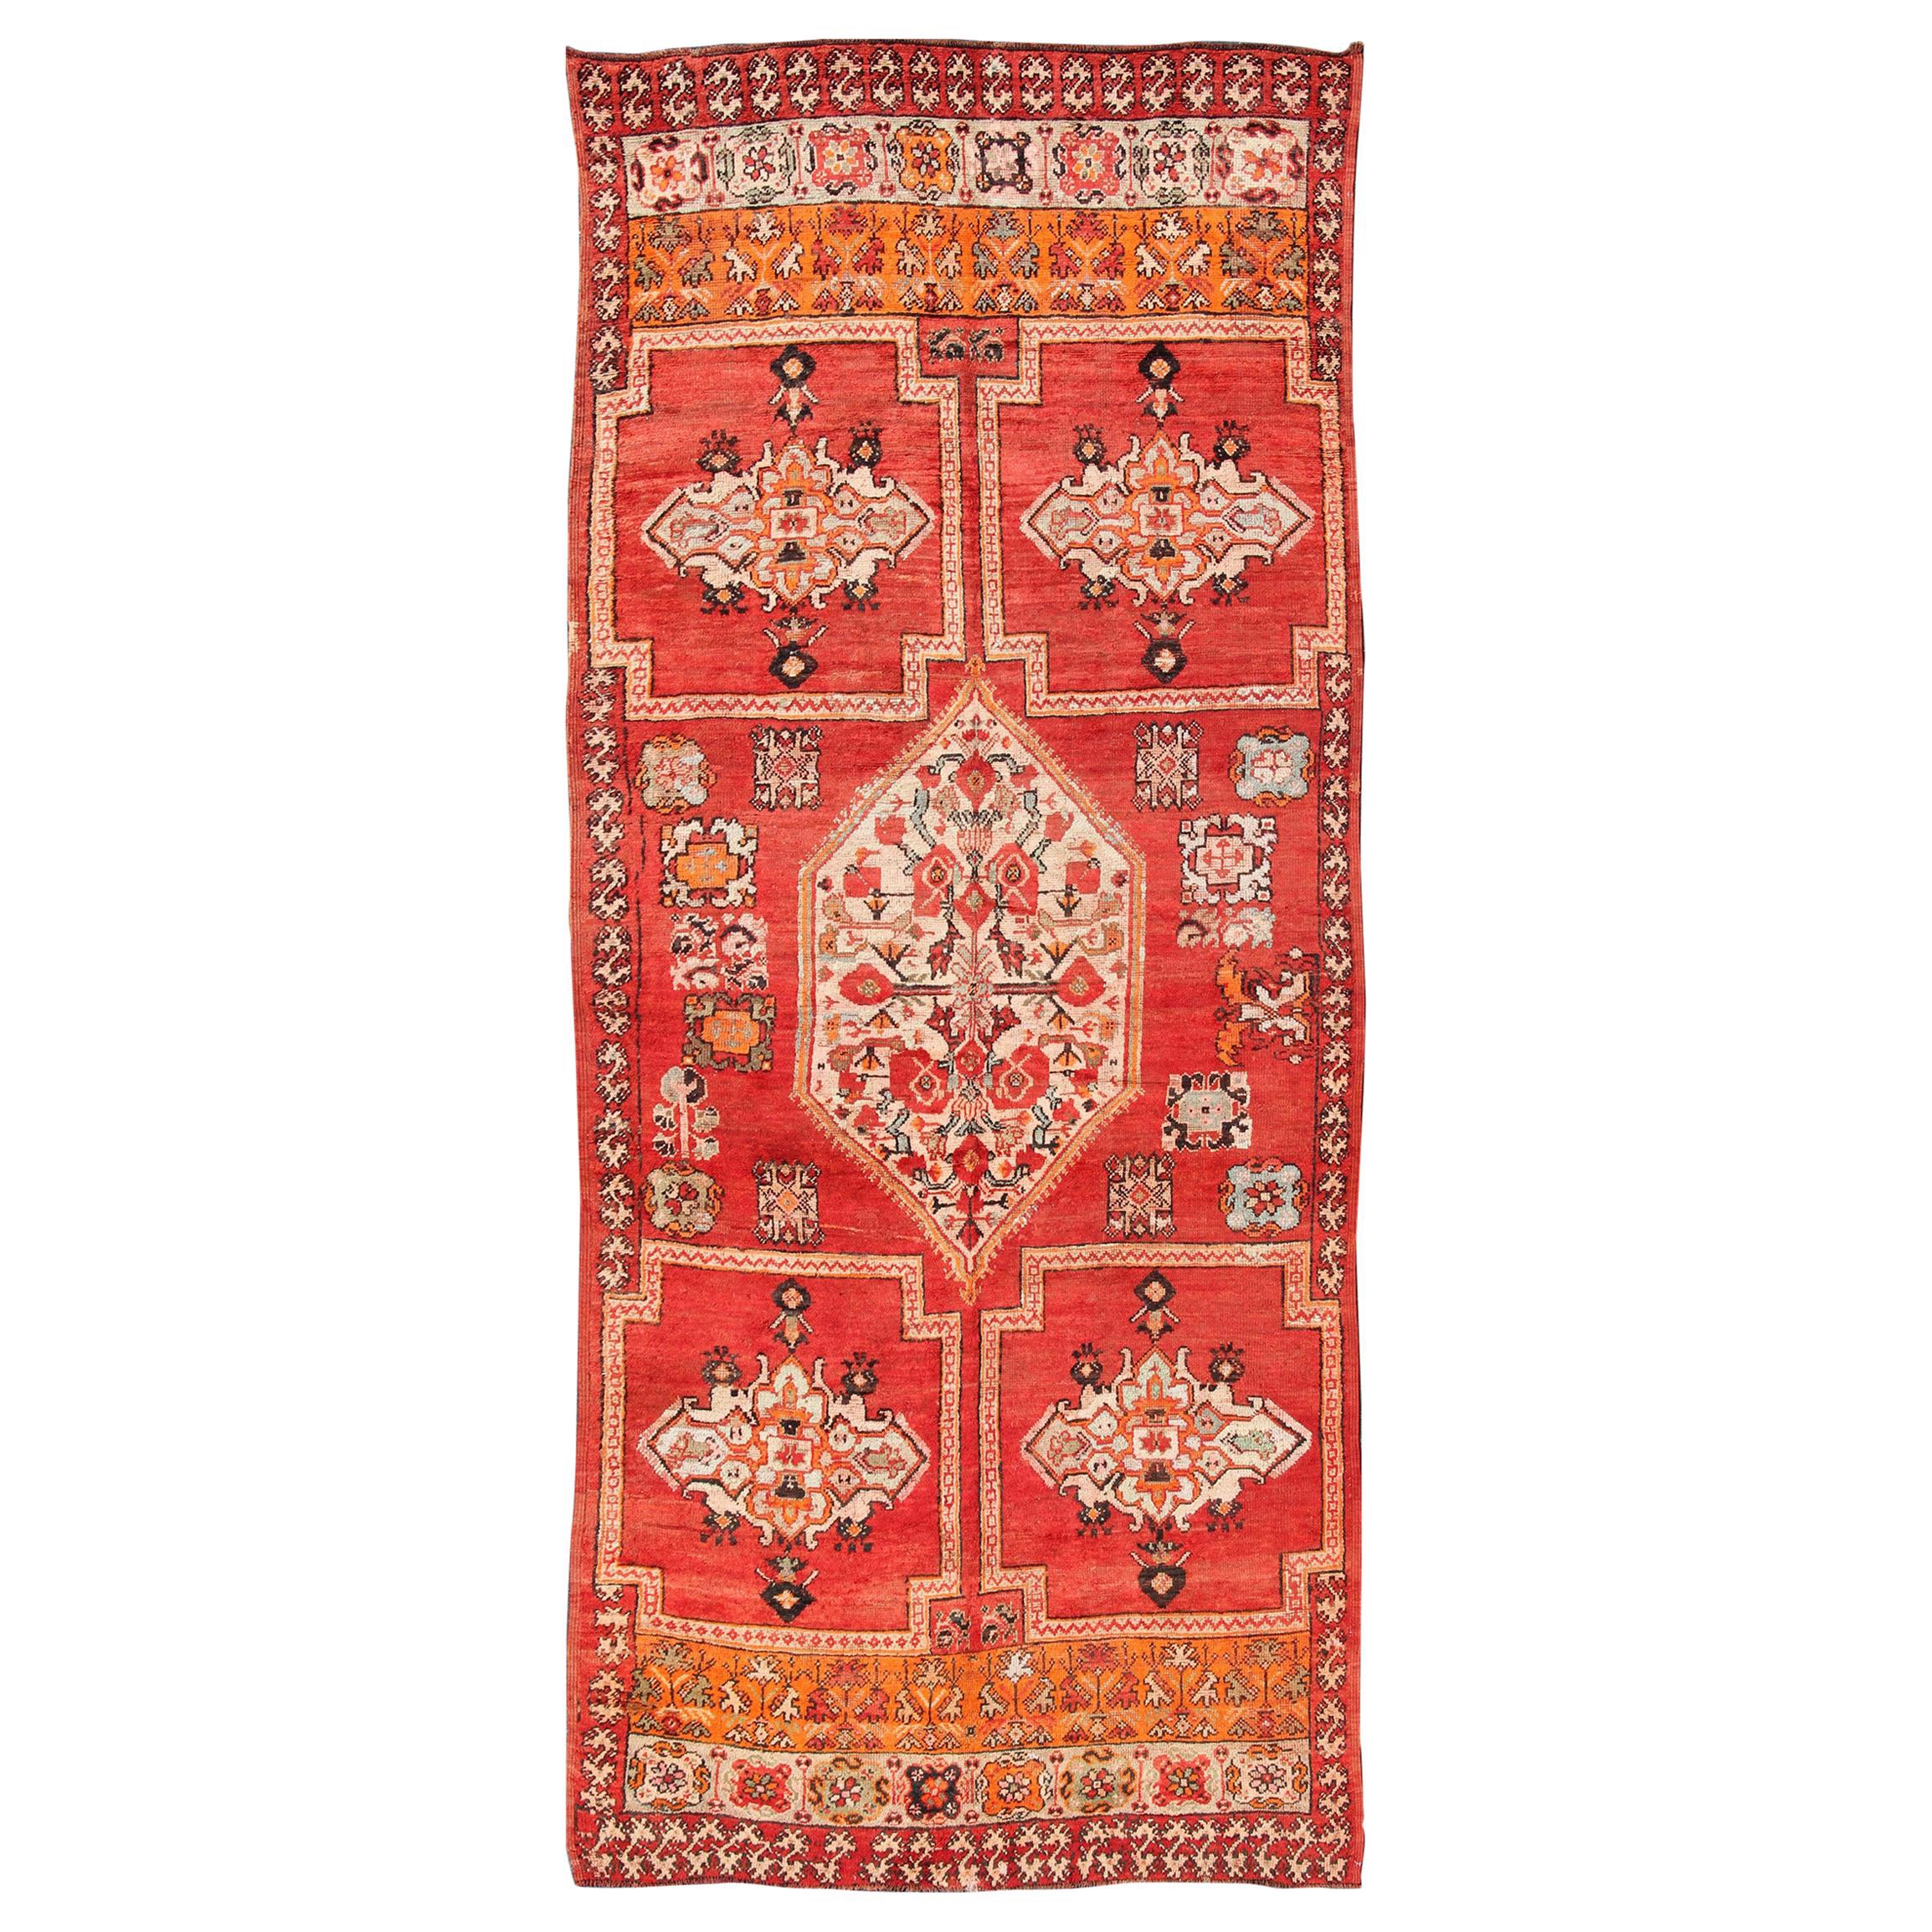 Large Vintage Moroccan Gallery Rug with Tribal Design in Red, Ivory and Orange